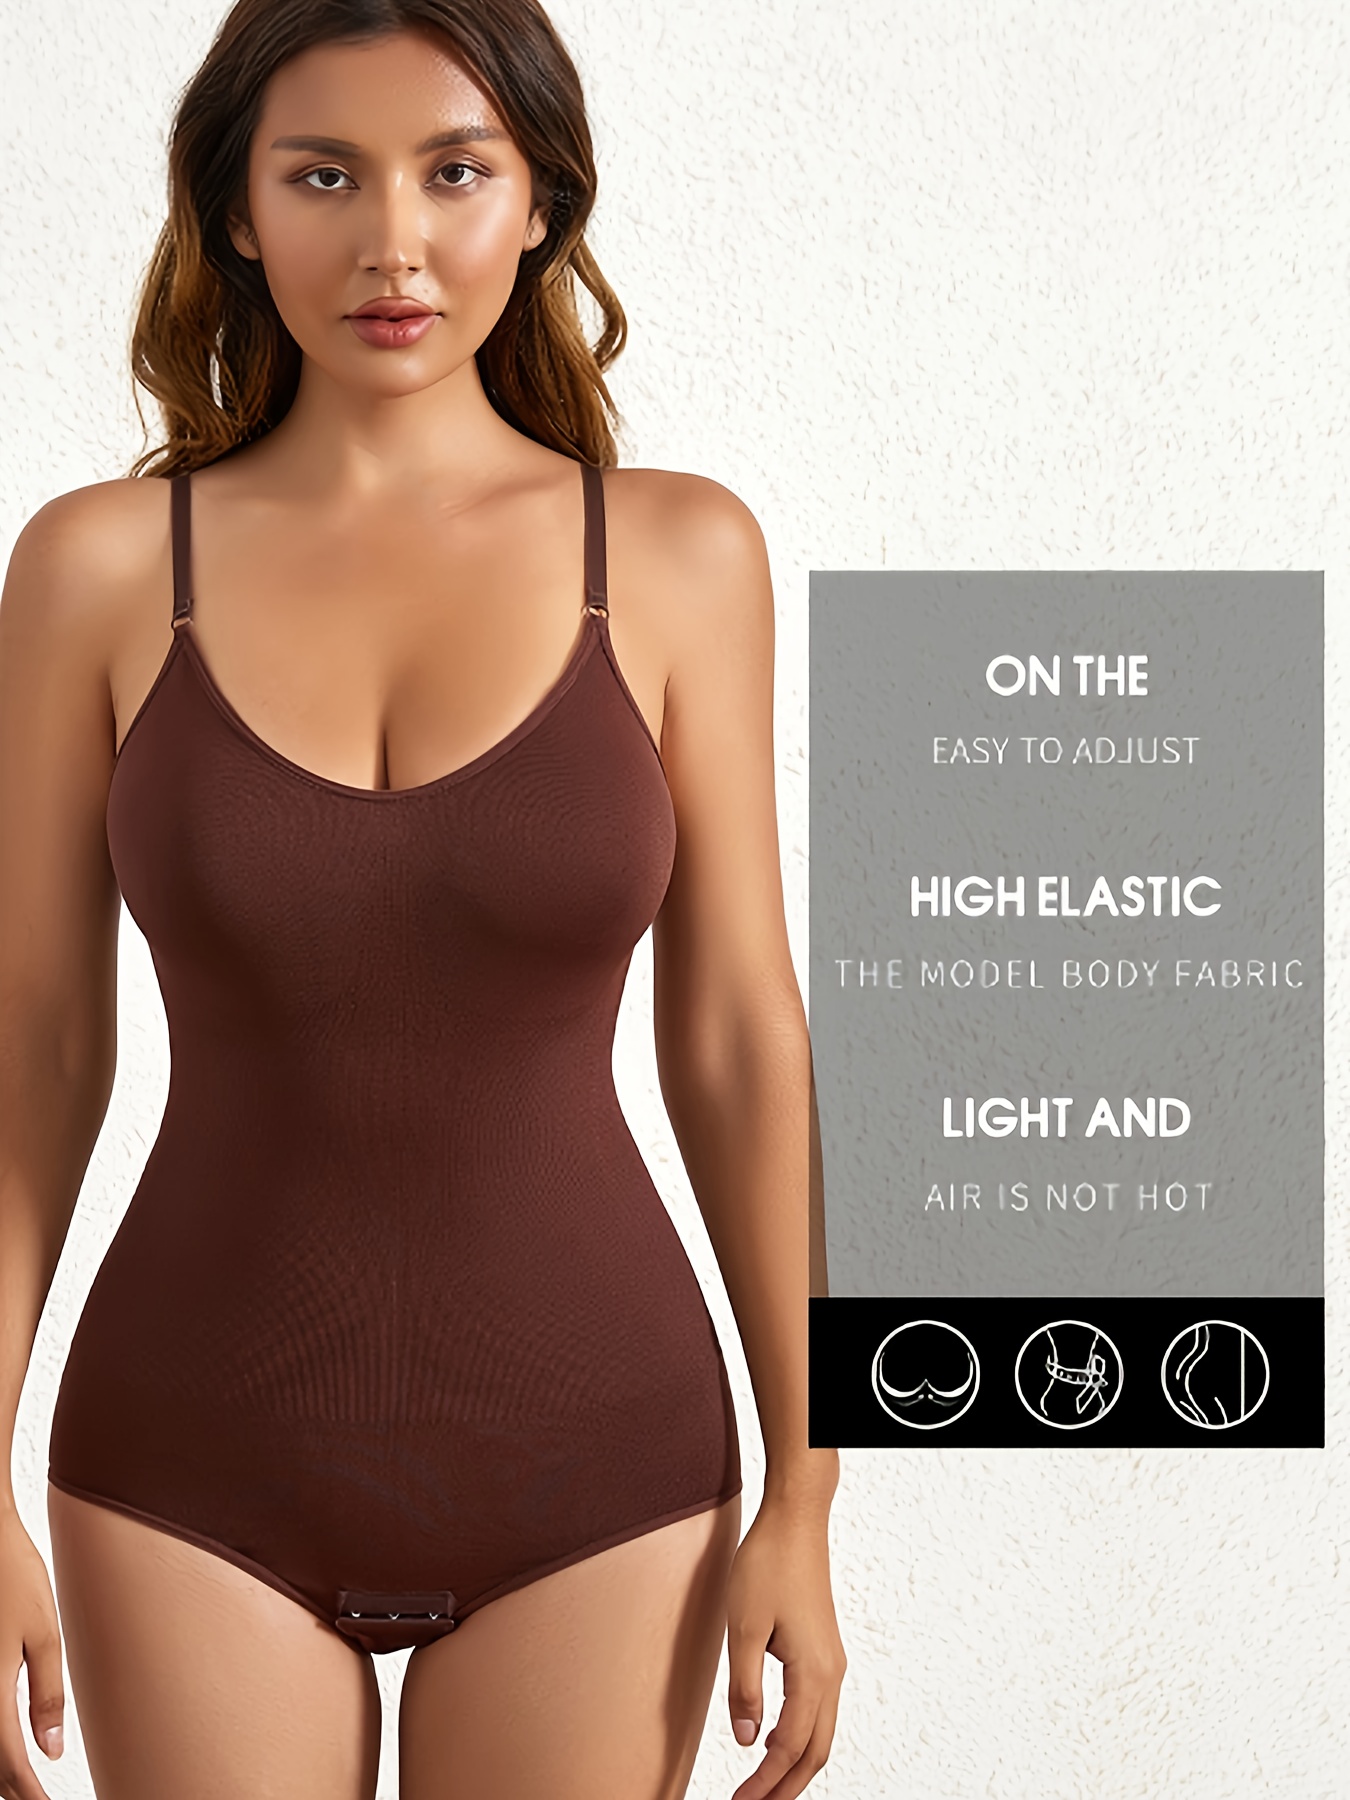 Full Body Slimming One-piece Shaper – Wear This Love